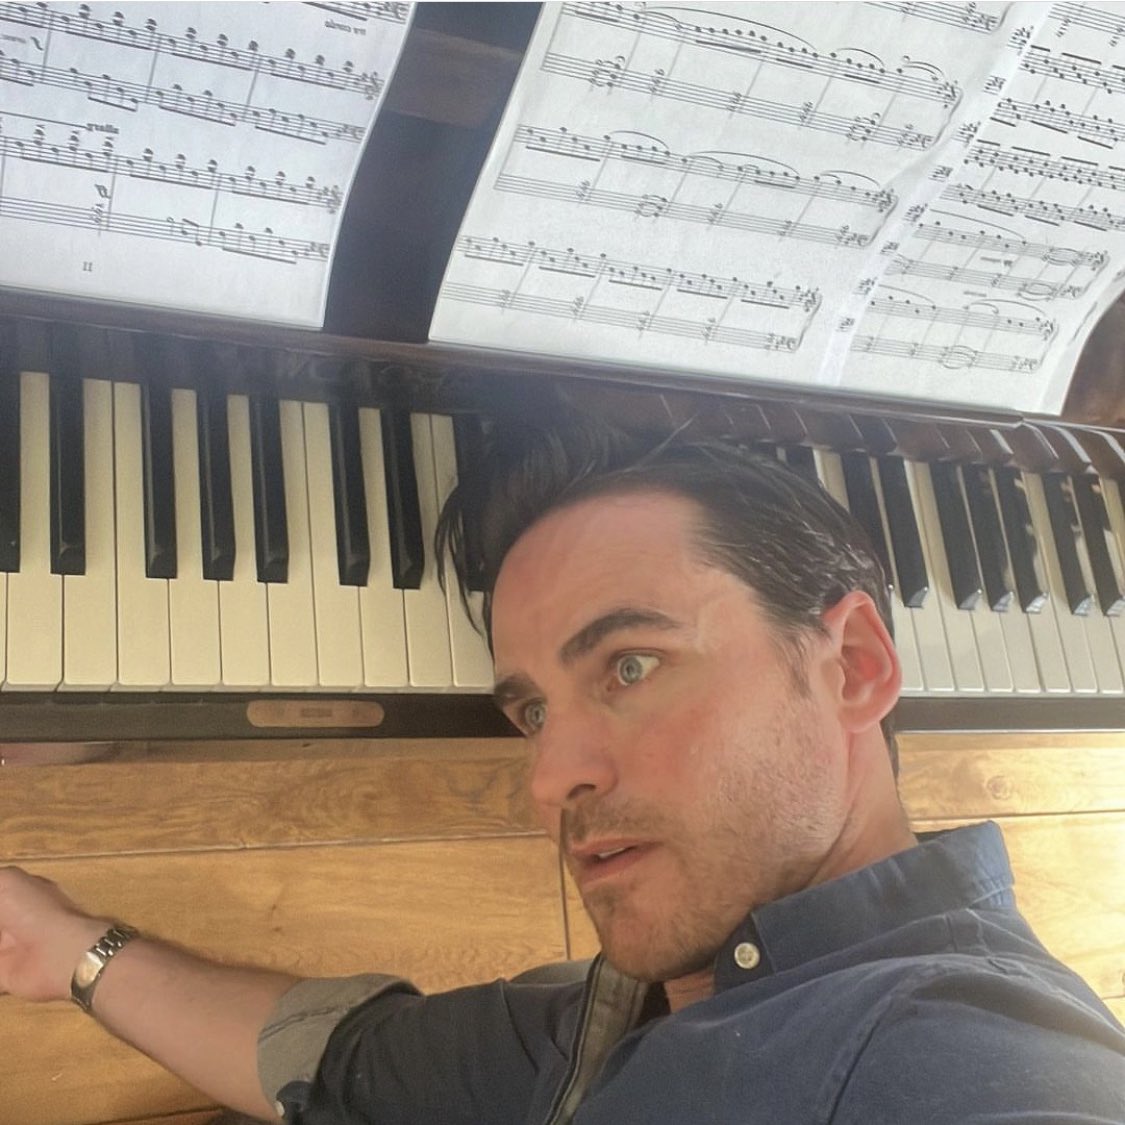 happy #NationalPianoMonth 🎹

really hoping that we will hear some new music from Colin 🙏🏼